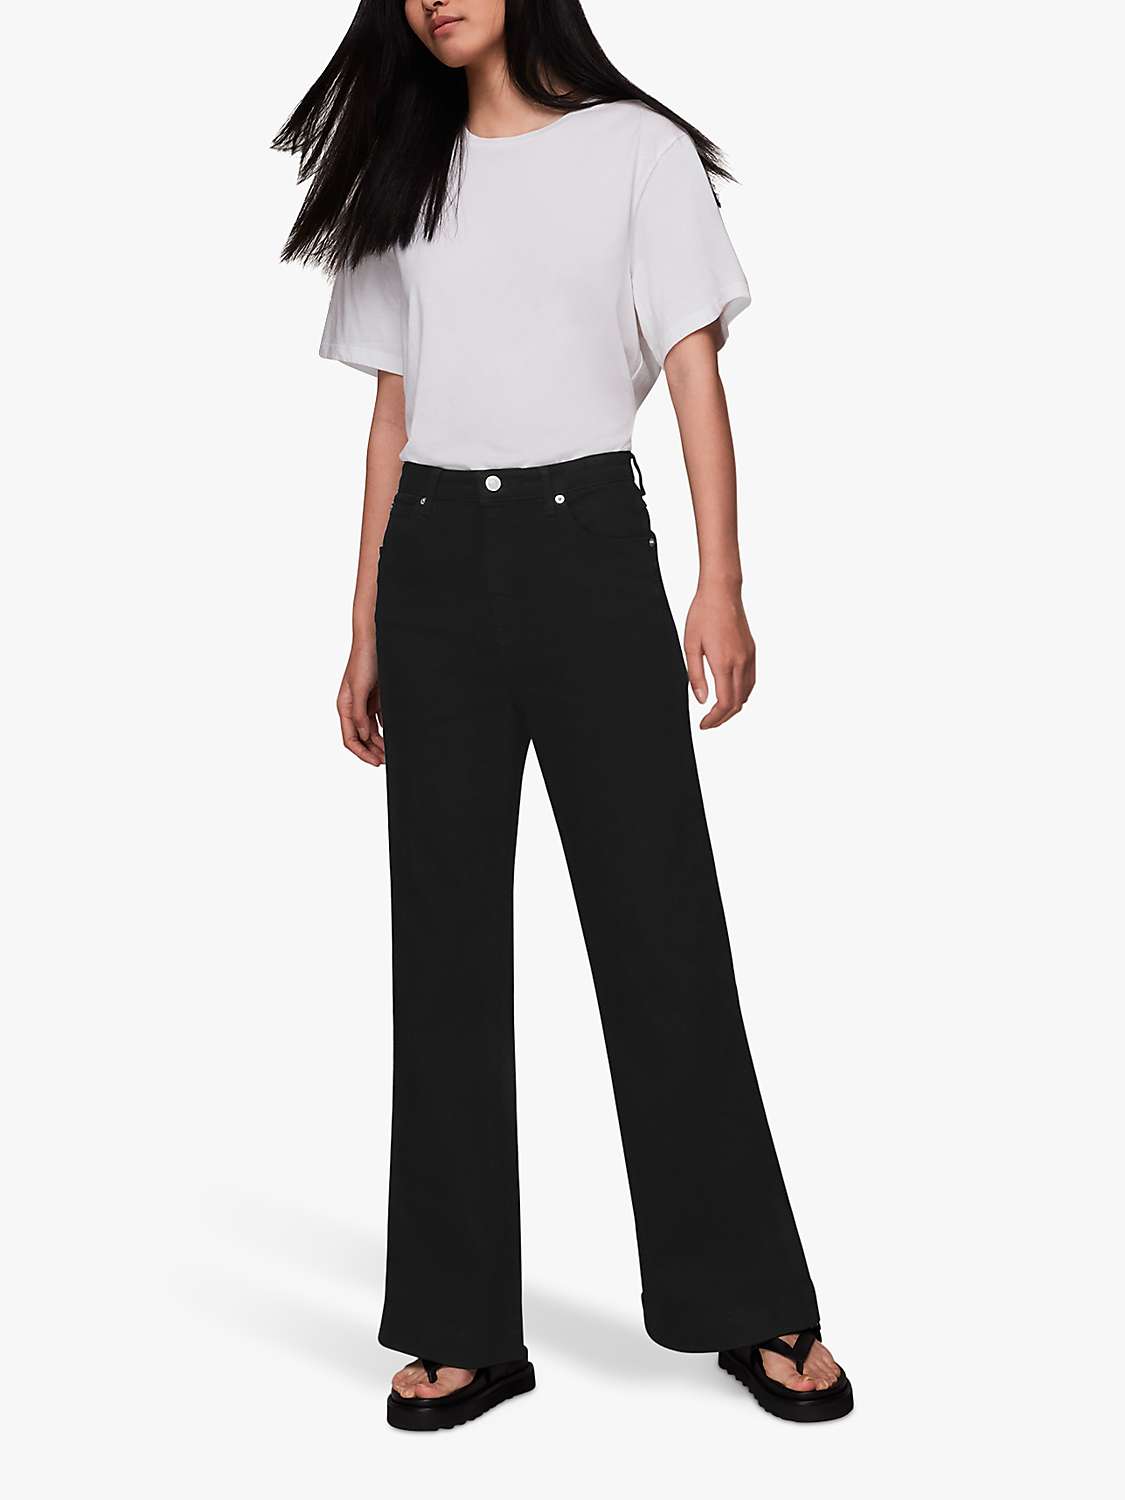 Whistles Lucy Stretched Flared Jeans, Black at John Lewis & Partners